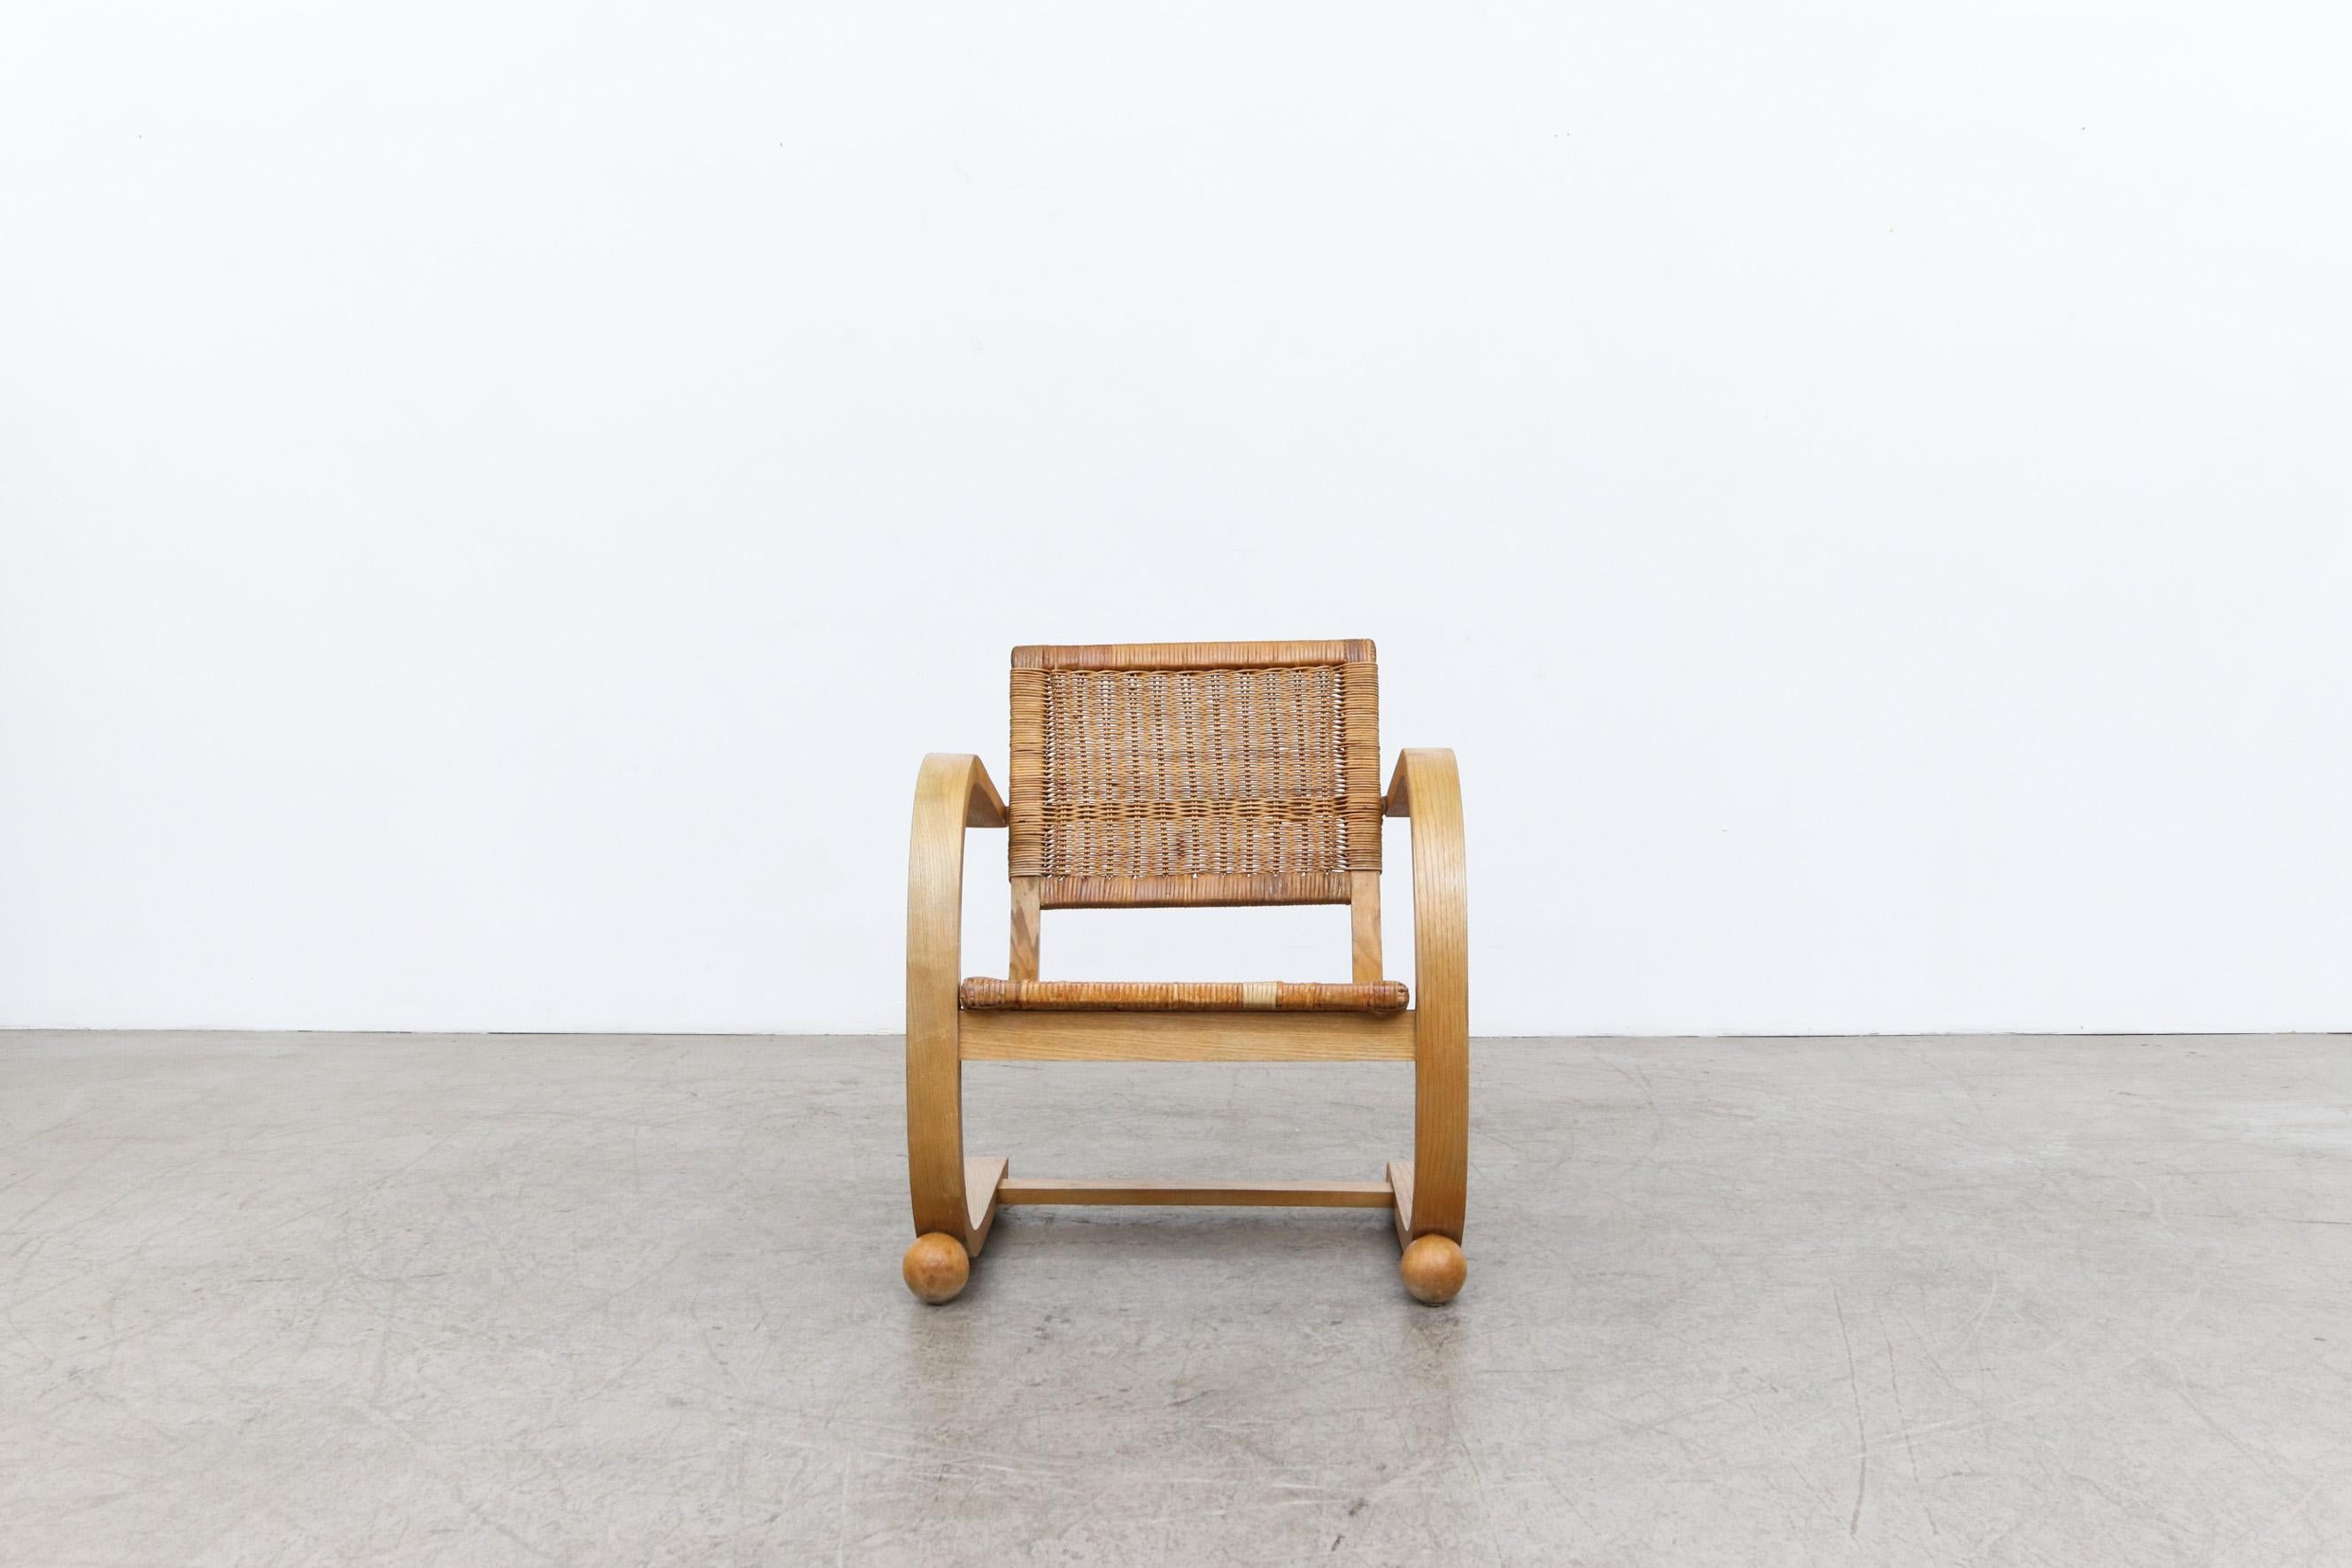 Bas van Pelt (attr) Bent wood lounge chair with rattan seat and ball feet. Refinished frame with original rattan seating. Seating shows visible wear and heavy patina with some repaired breakage to rattan. Wear is consistent with its age and use.